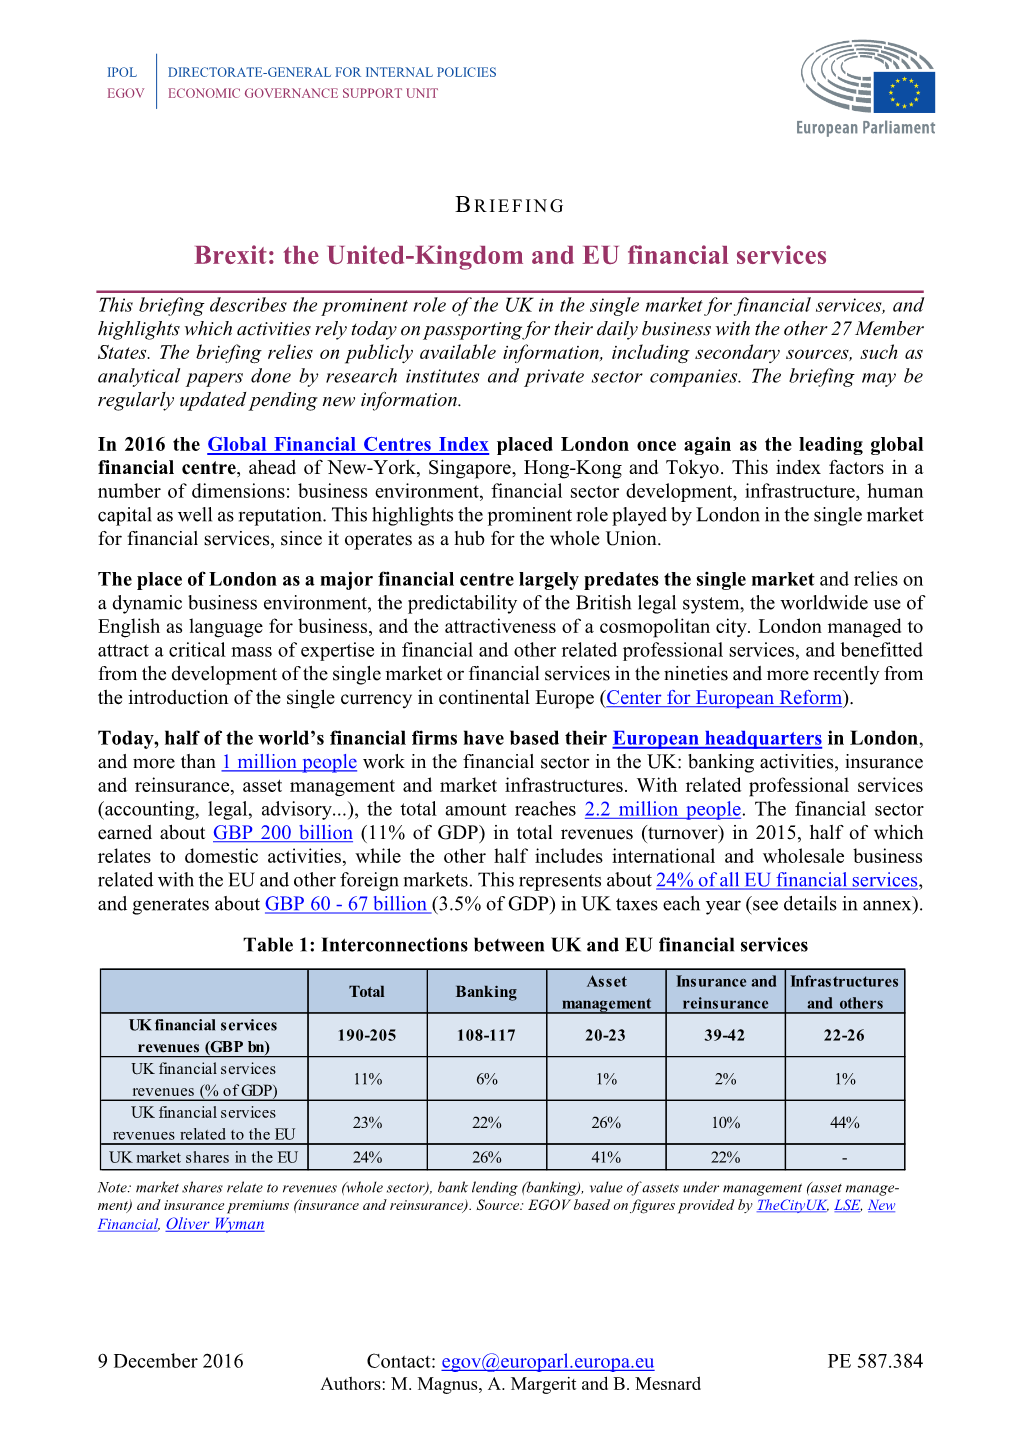 Brexit: the United-Kingdom and EU Financial Services